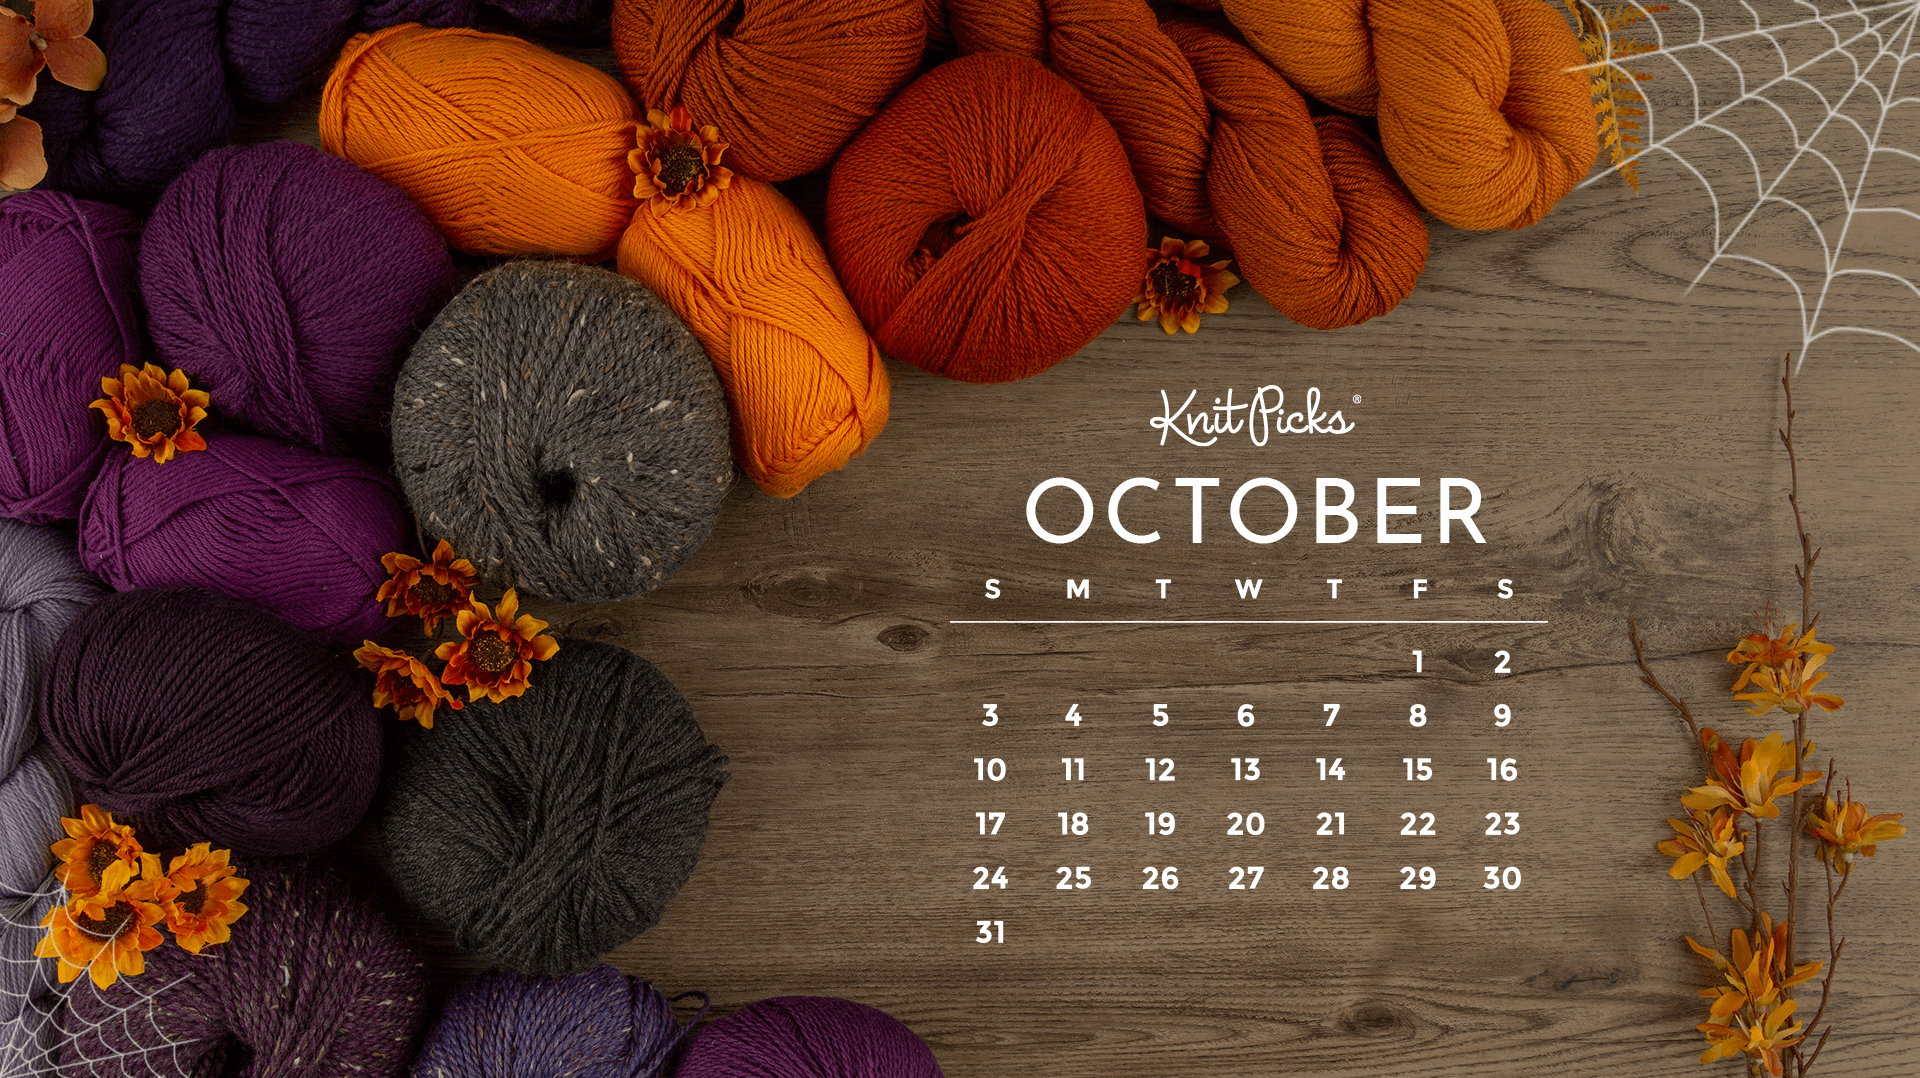 Able October Calendar The Knit Picks Staff